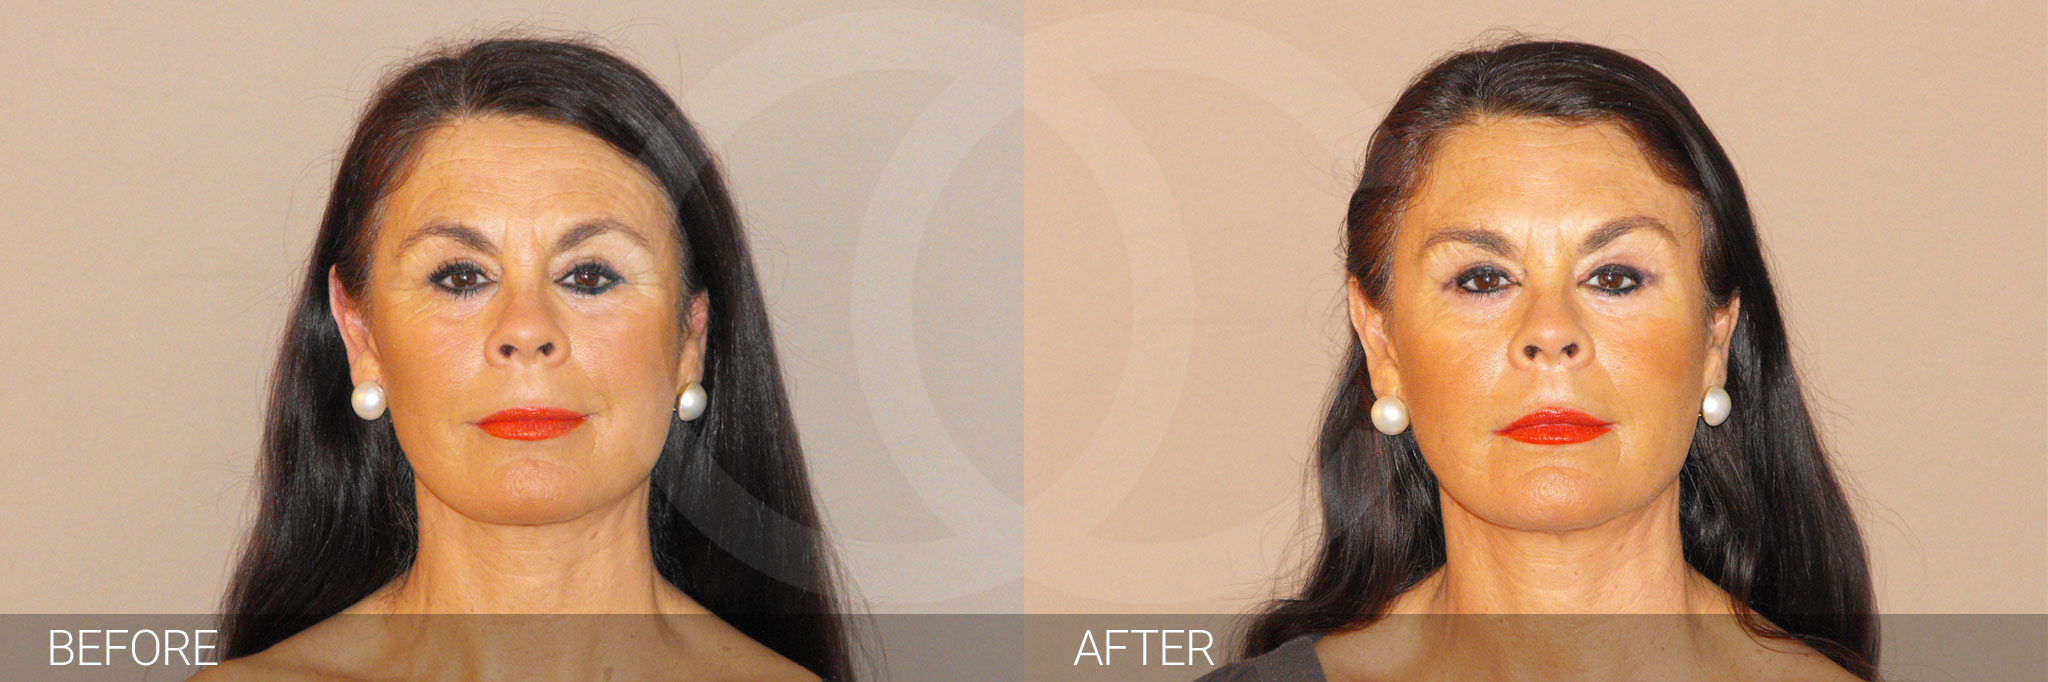 Cosmetic Facial Injections Injections ante/post-op I